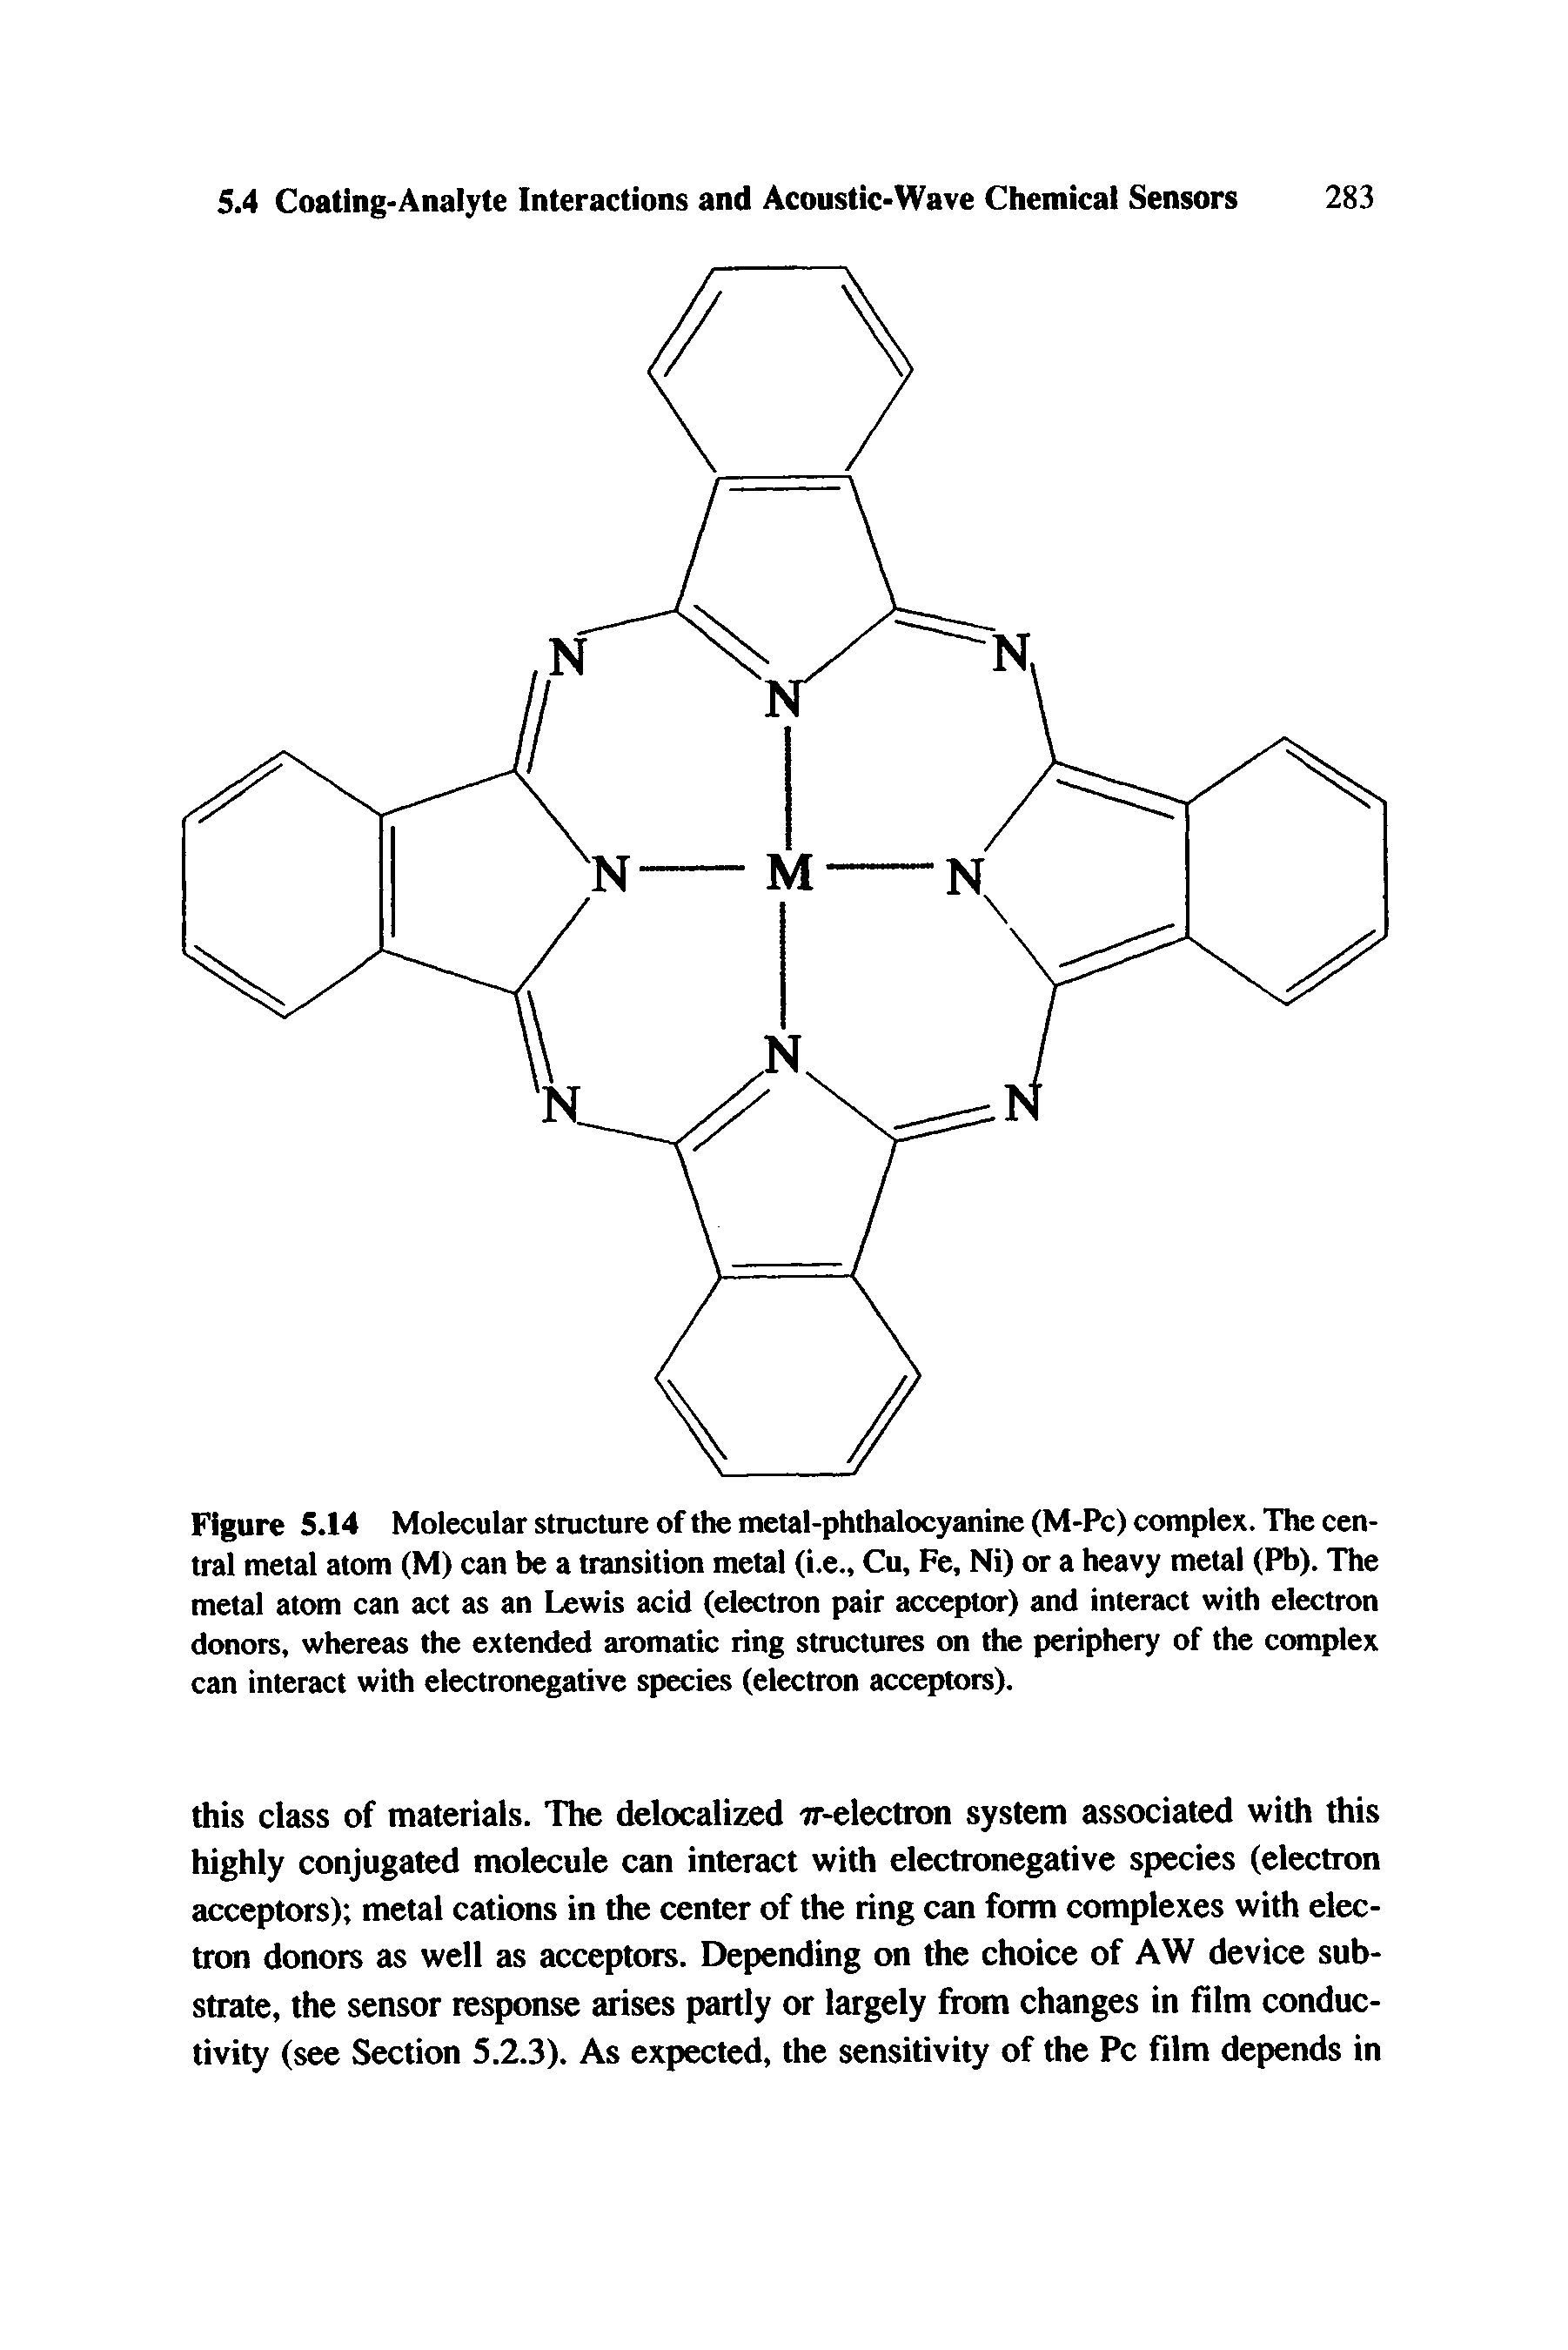 Figure 5.14 Molecular structure of the metal-phthalocyanine (M-Pc) complex. The central metal atom (M) can be a transition metal (i.e., Cu, Fe, Ni) or a heavy metal (Pb). The metal atom can act as an Lewis acid (electron pair acceptor) and interact with electron donors, whereas the extended aromatic ring structures on the periphery of the complex can interact with electronegative species (electron acceptors).